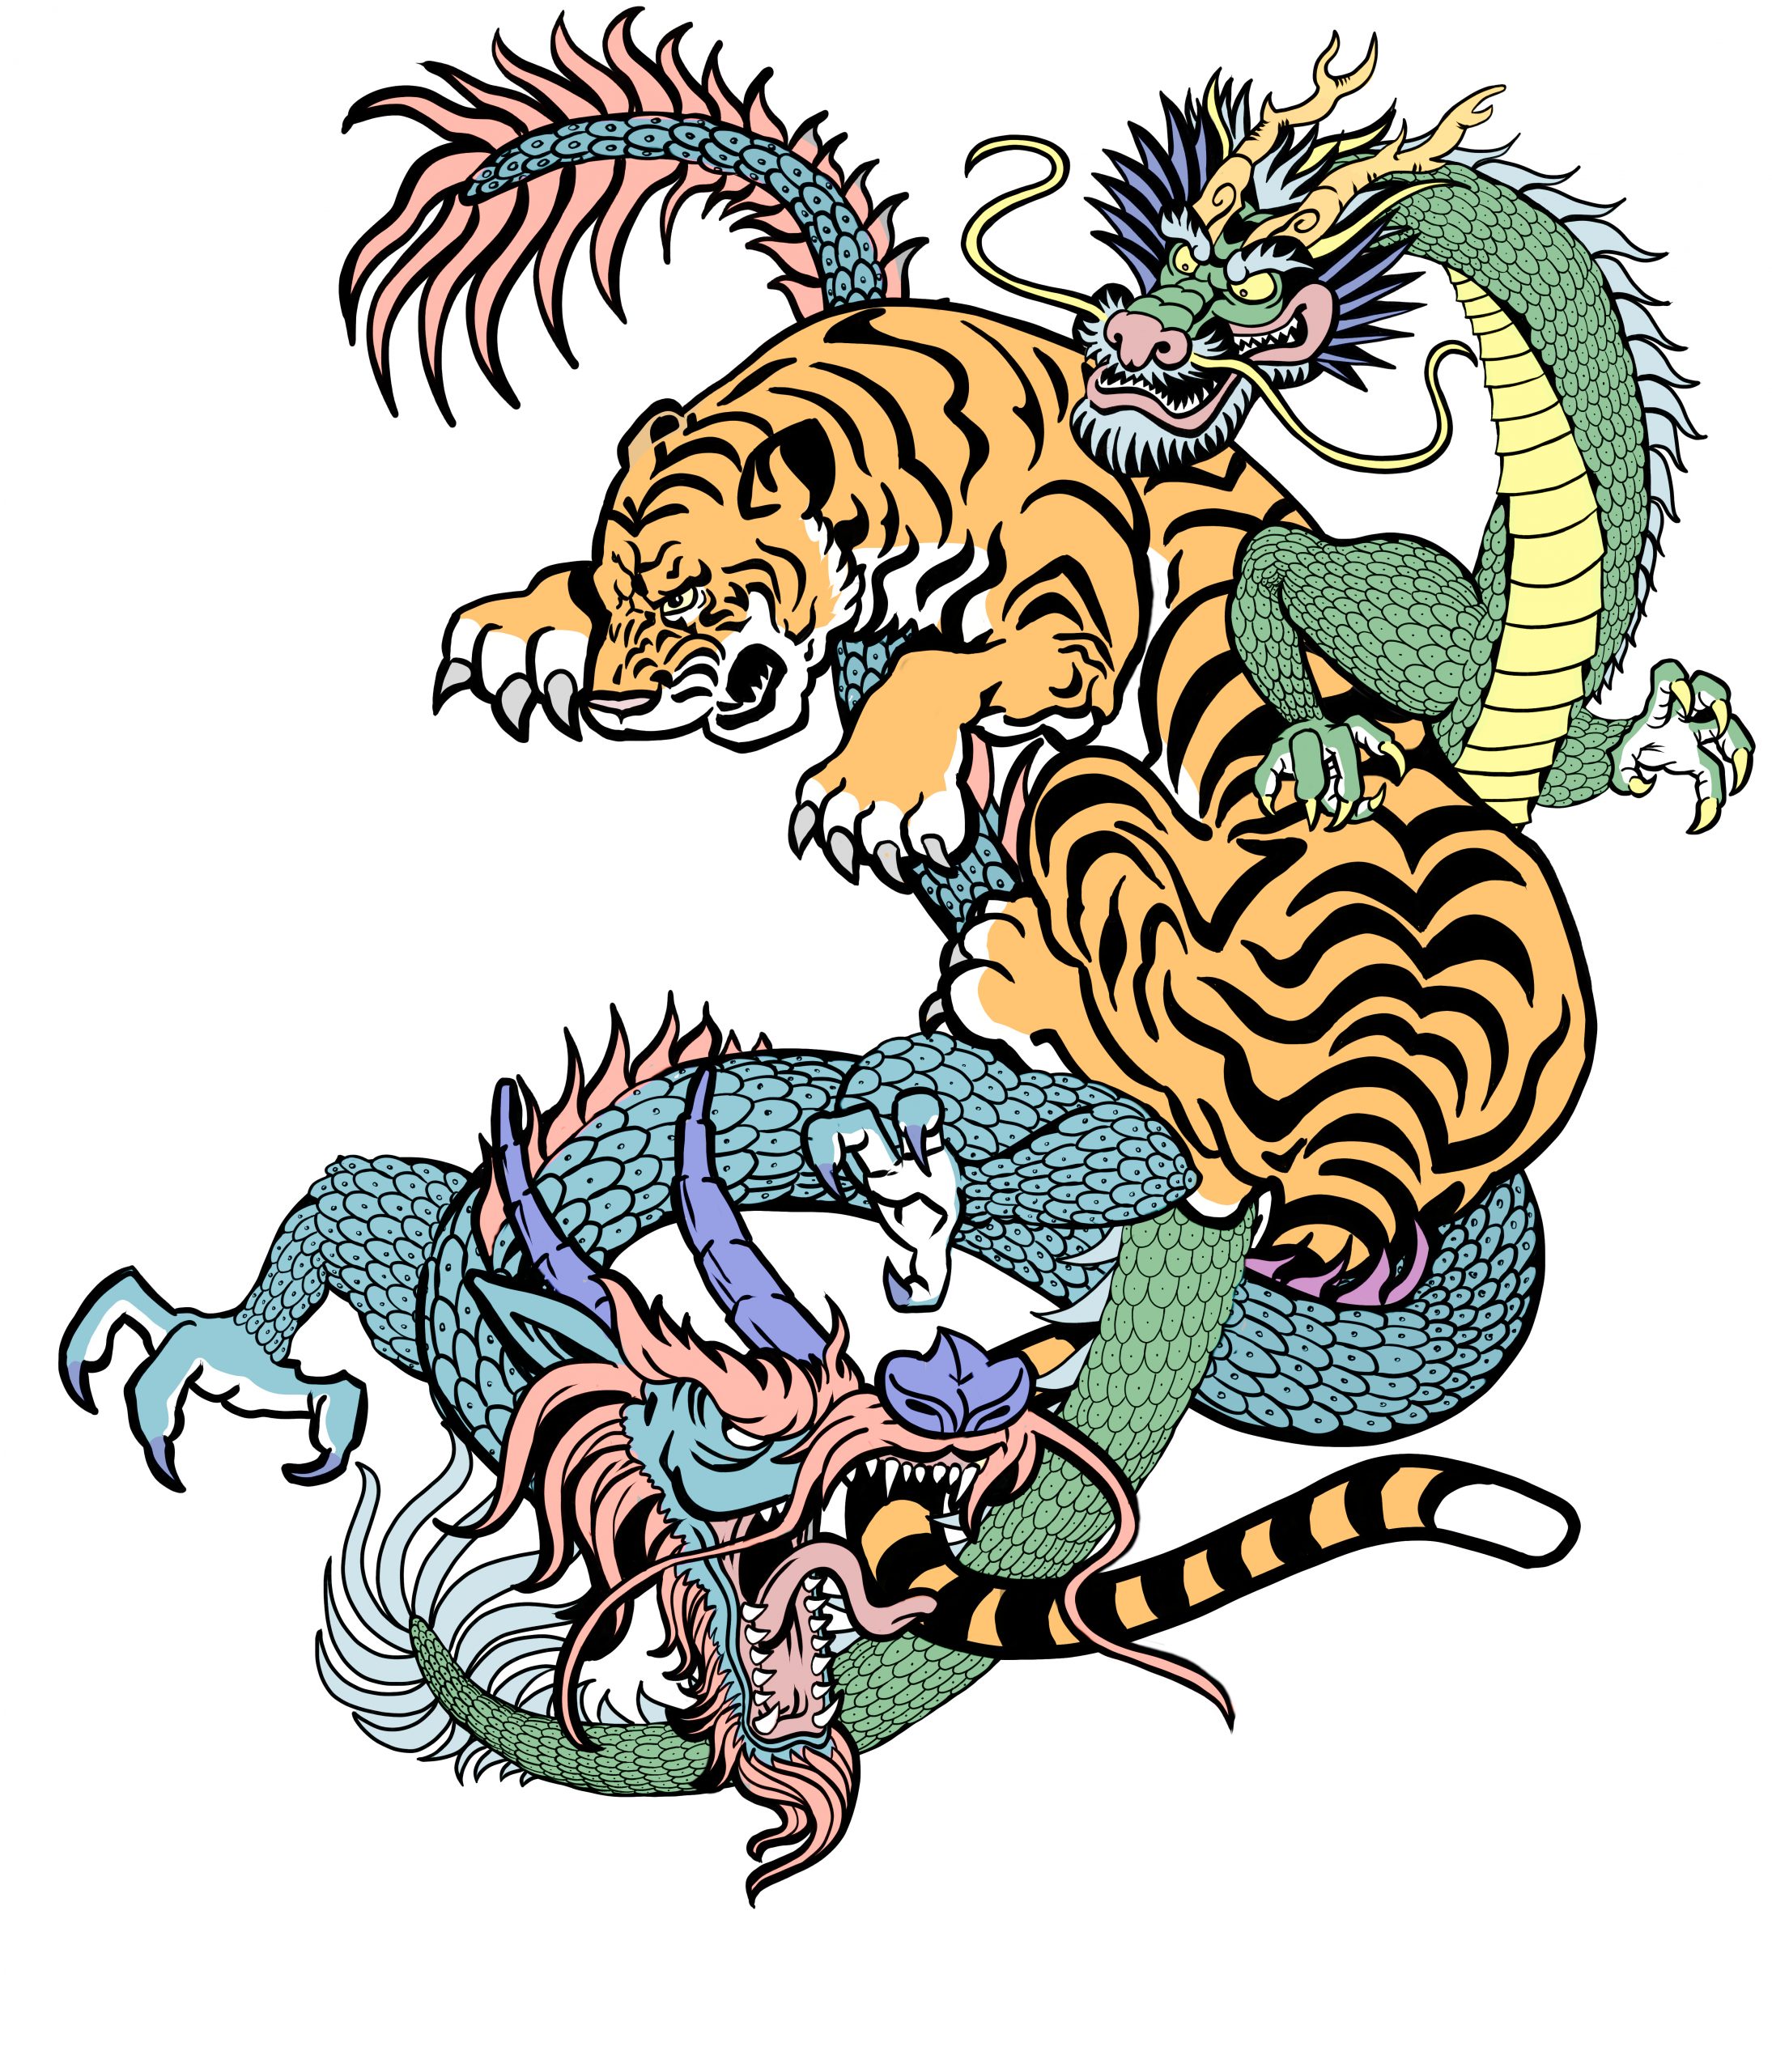 The tiger turned out cool, but I don't like the dragons very much.